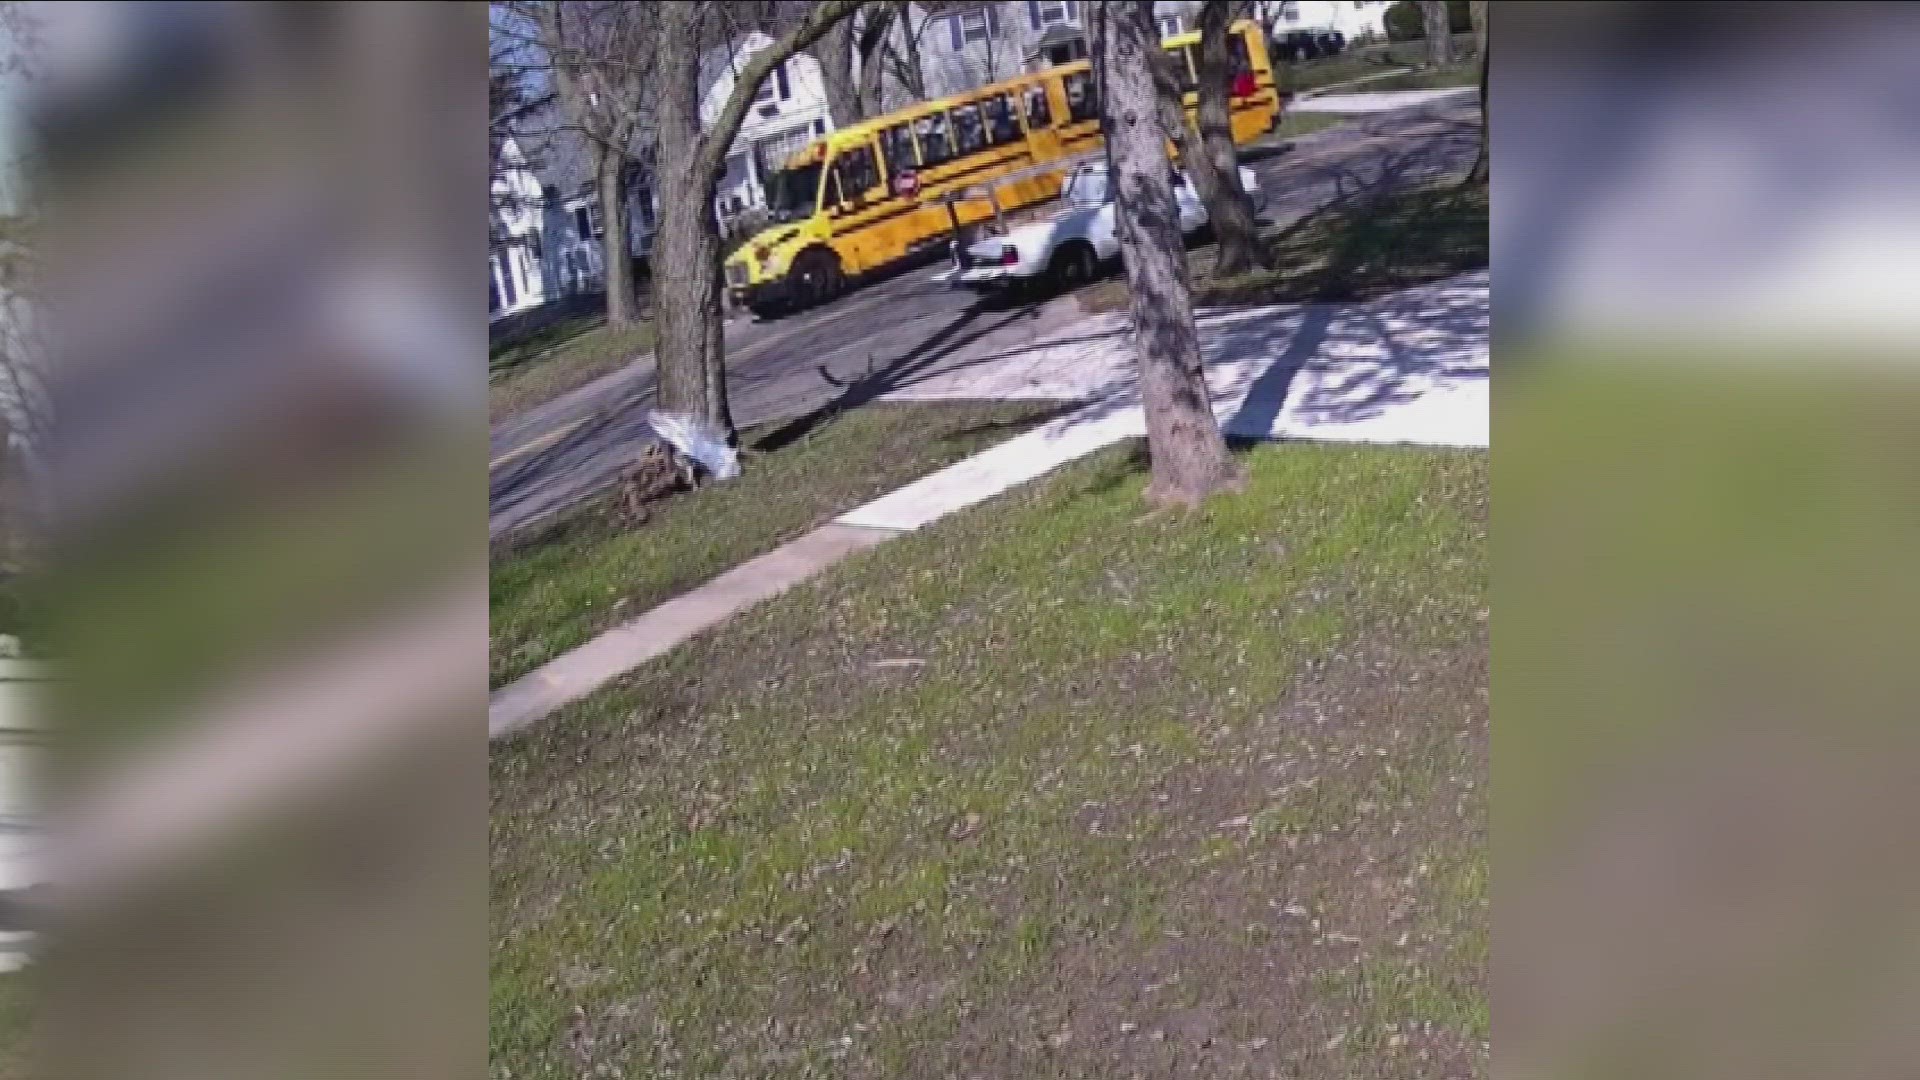 Driver tried passing between a driveway and a person getting off the bus